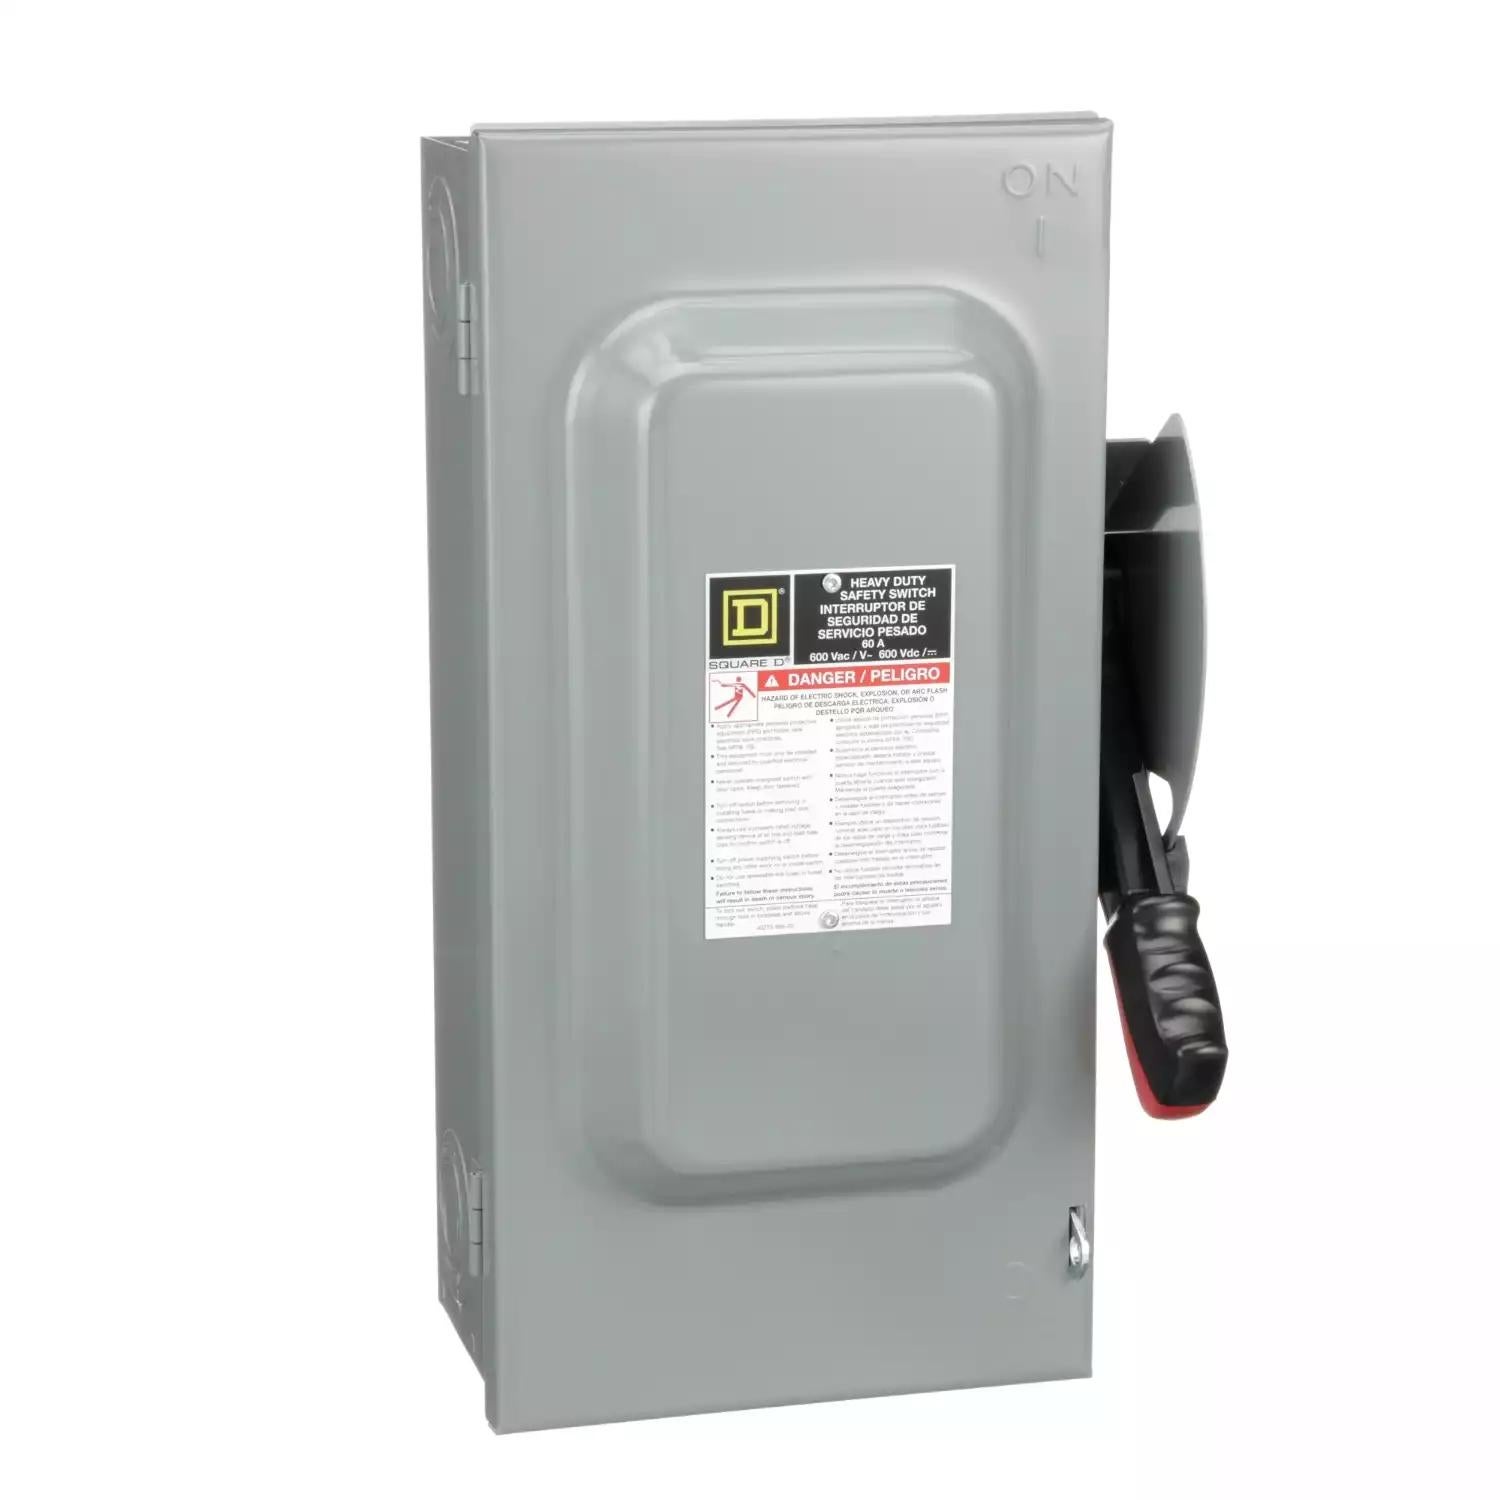 Safety switch, heavy duty, fusible, 60A, 3 wire, 3 poles, 50hp, 600VAC/DC, Type 1